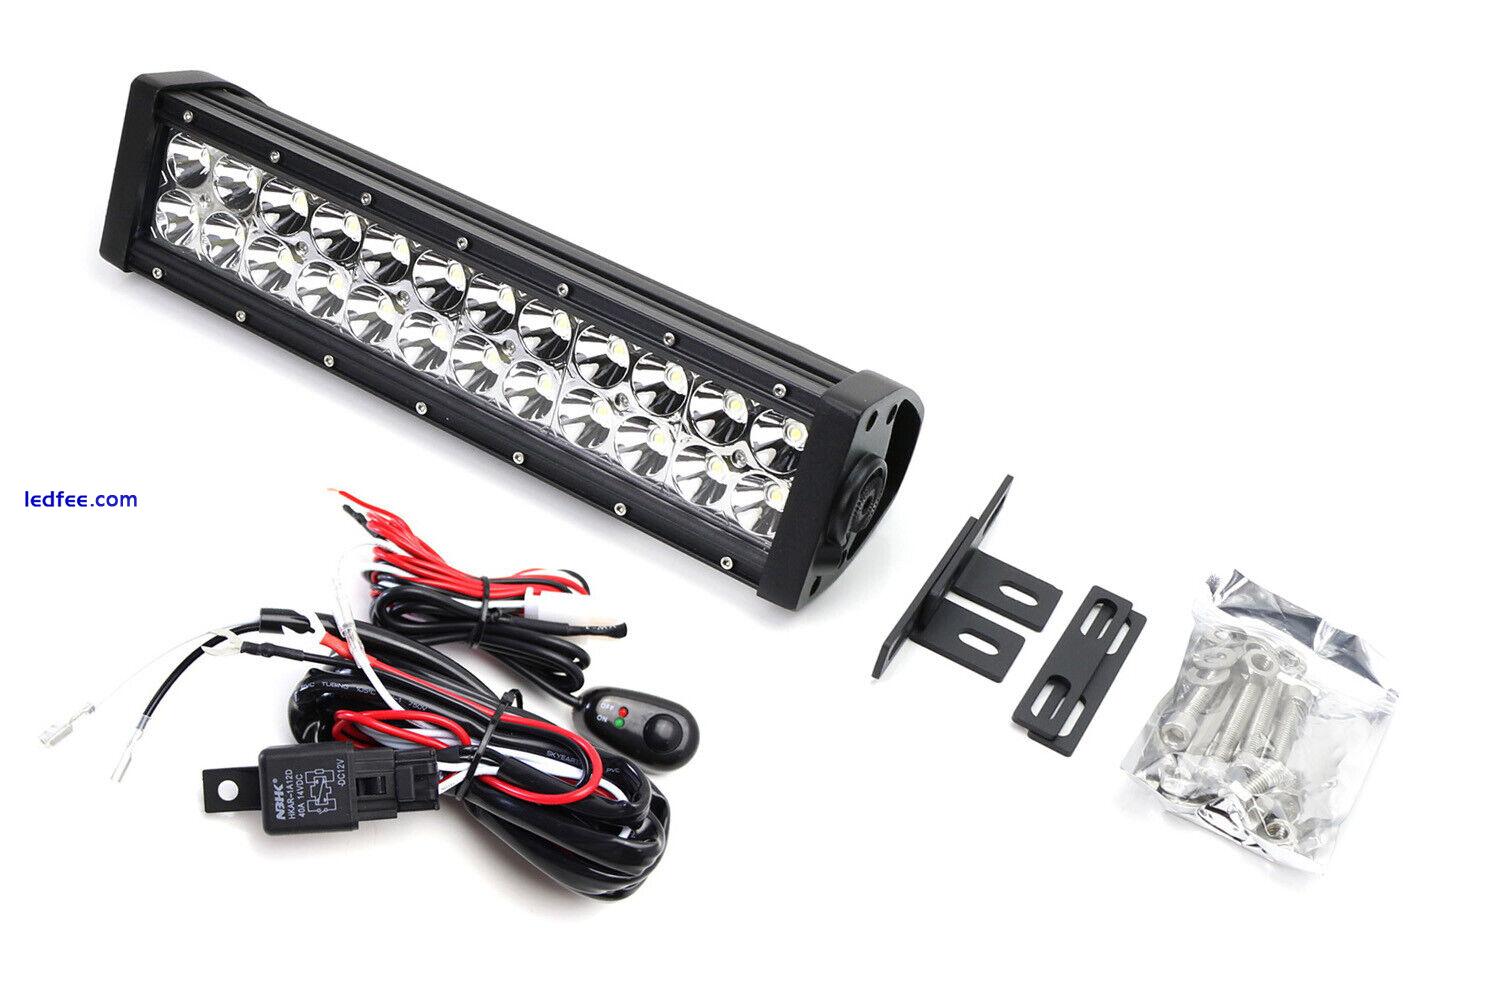 Invisible Behind OEM Grill Mount LED Light Bar Kit w/ Wiring For 17-20 Raptor 1 